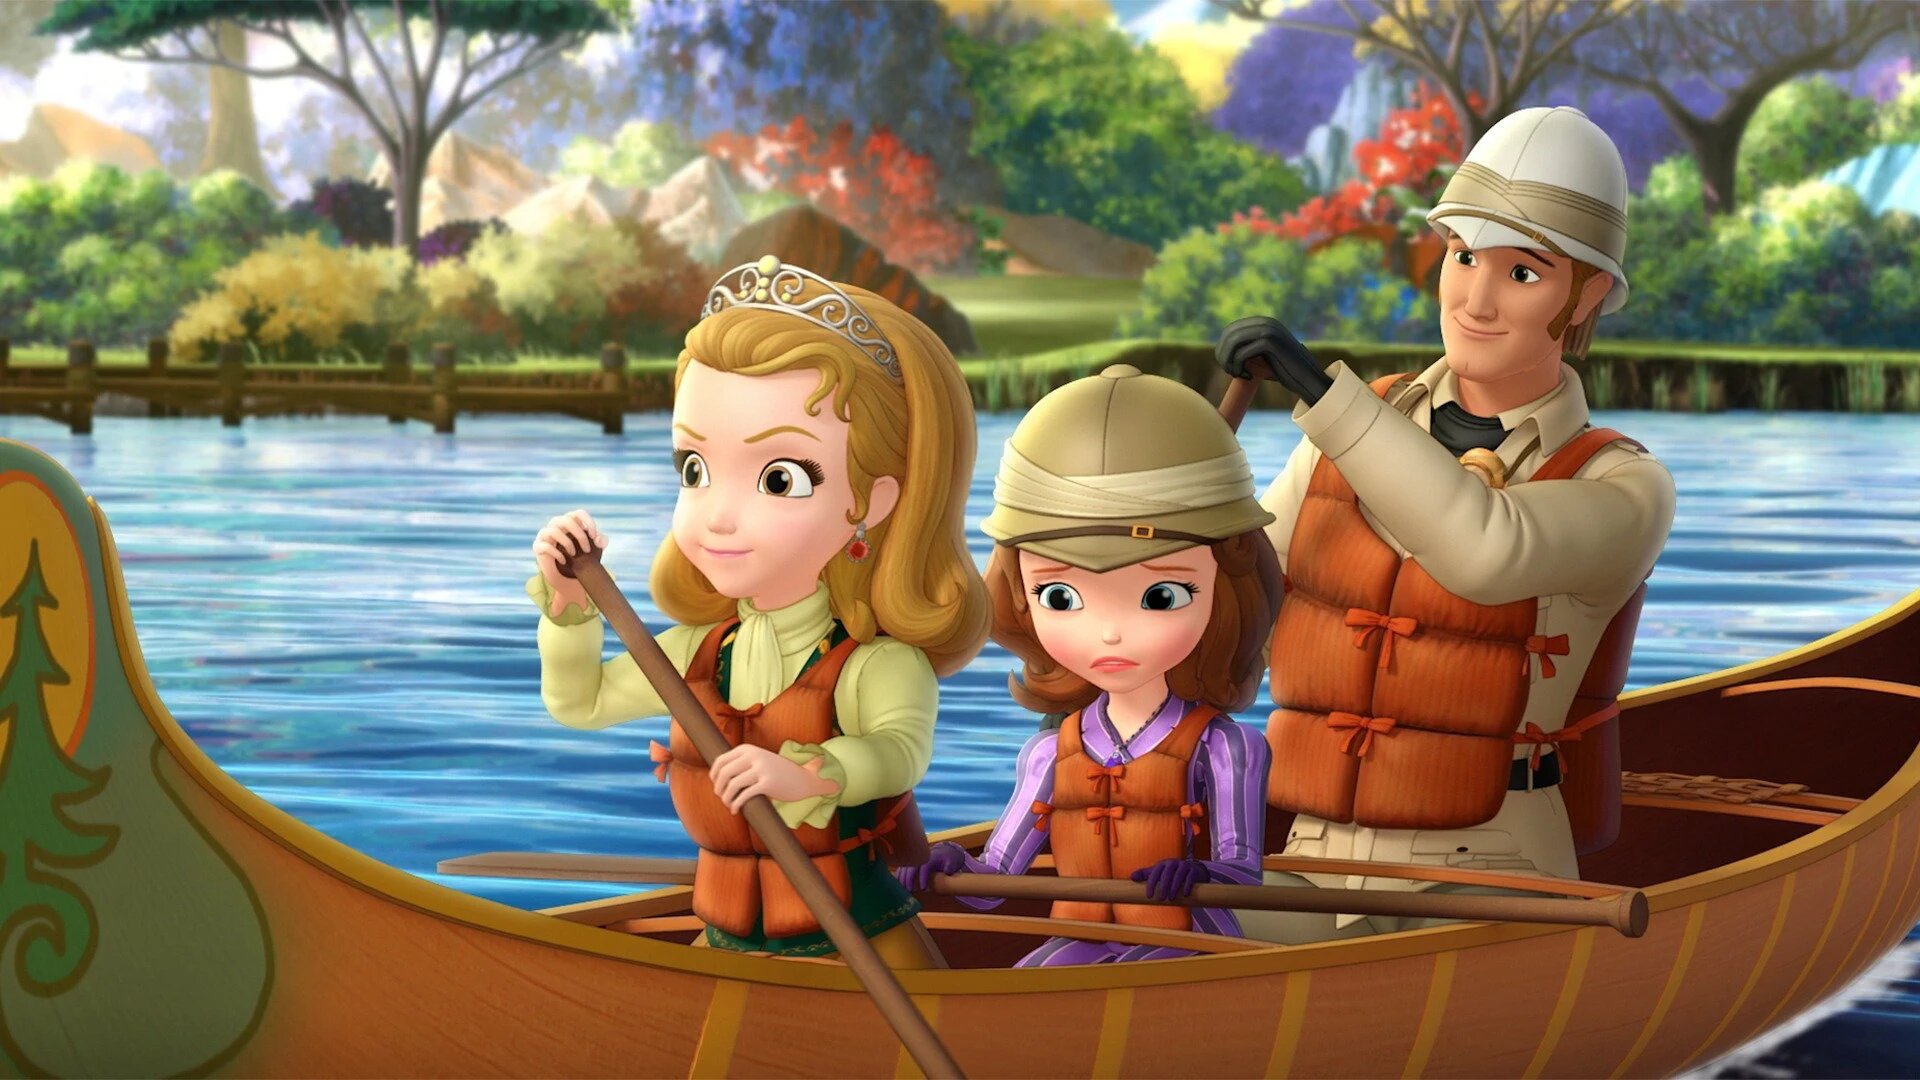 Sofia the First S3E20 Dads and Daughters Day